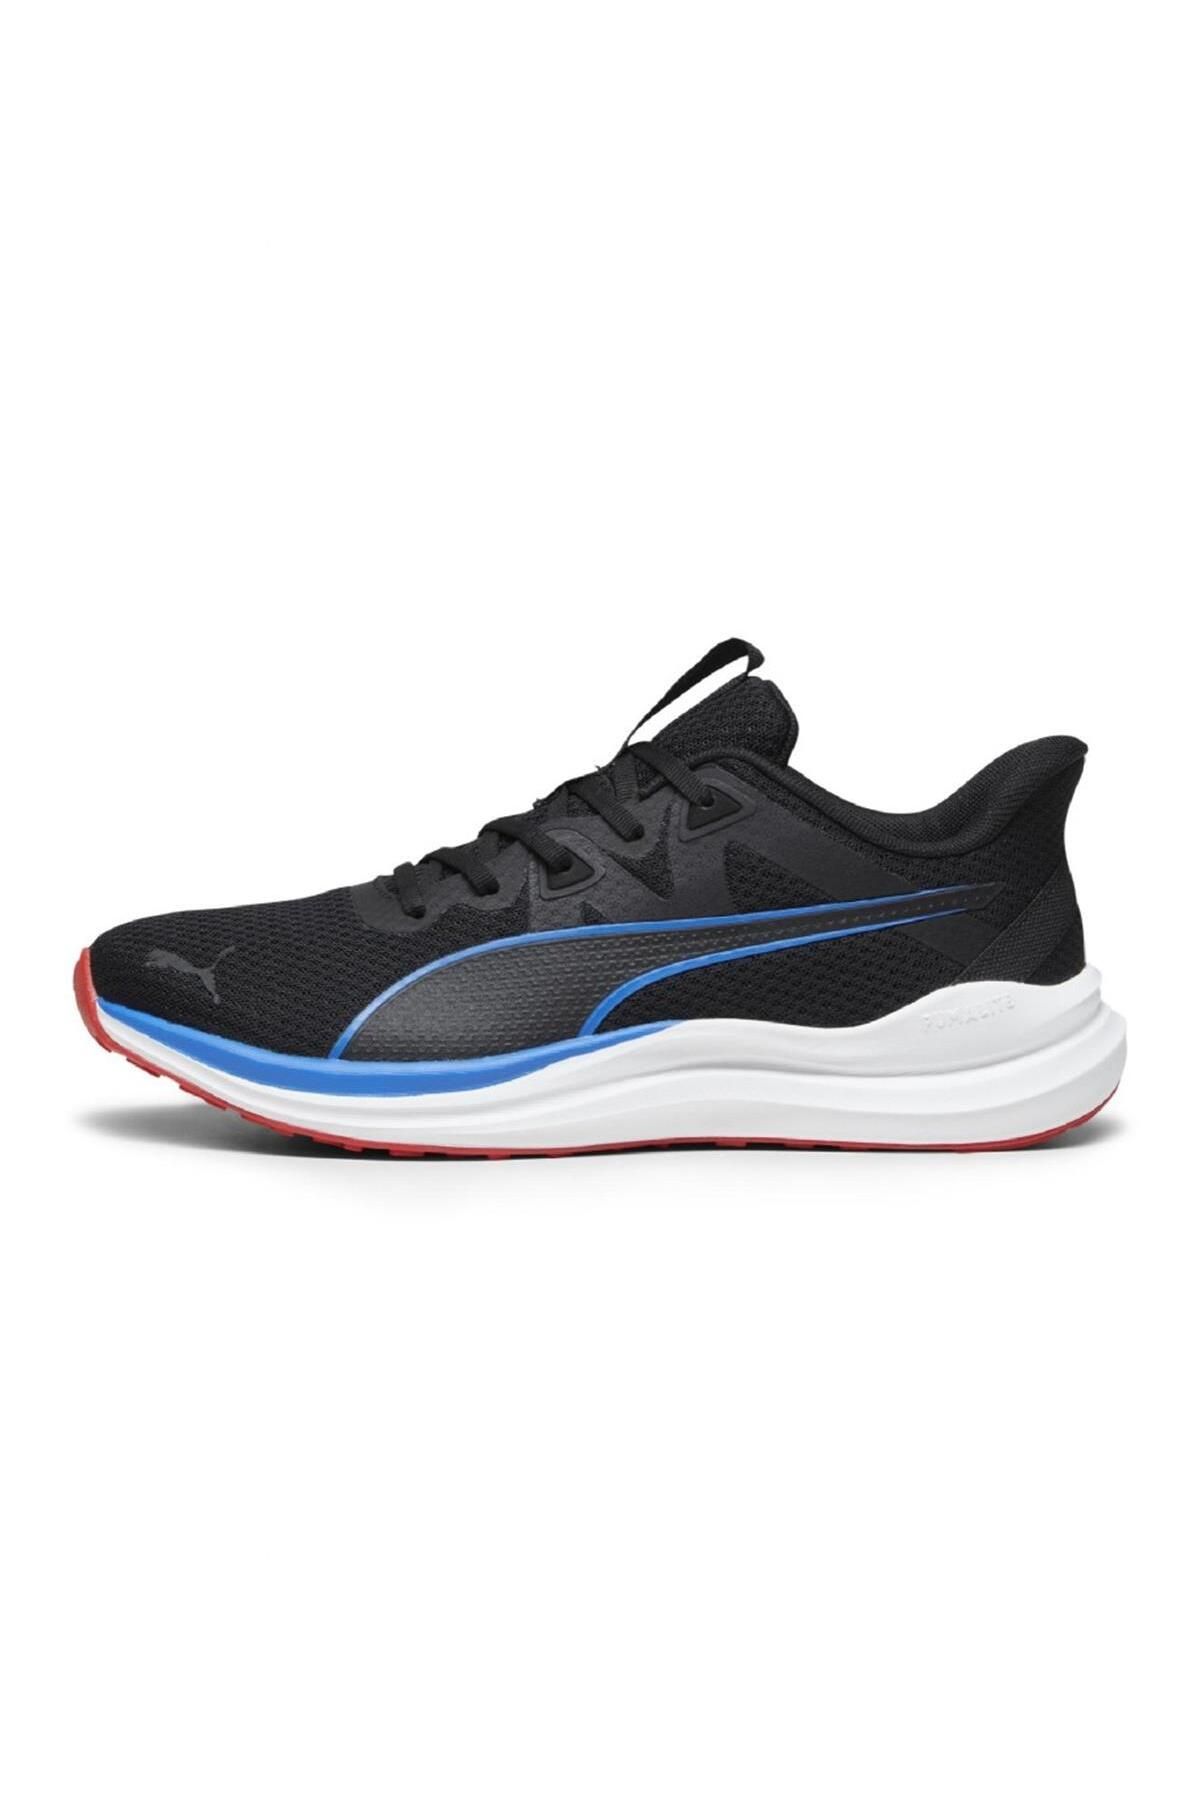 Puma 37876809 Reflect Lite Black-Ultra Blue-For All Time Red